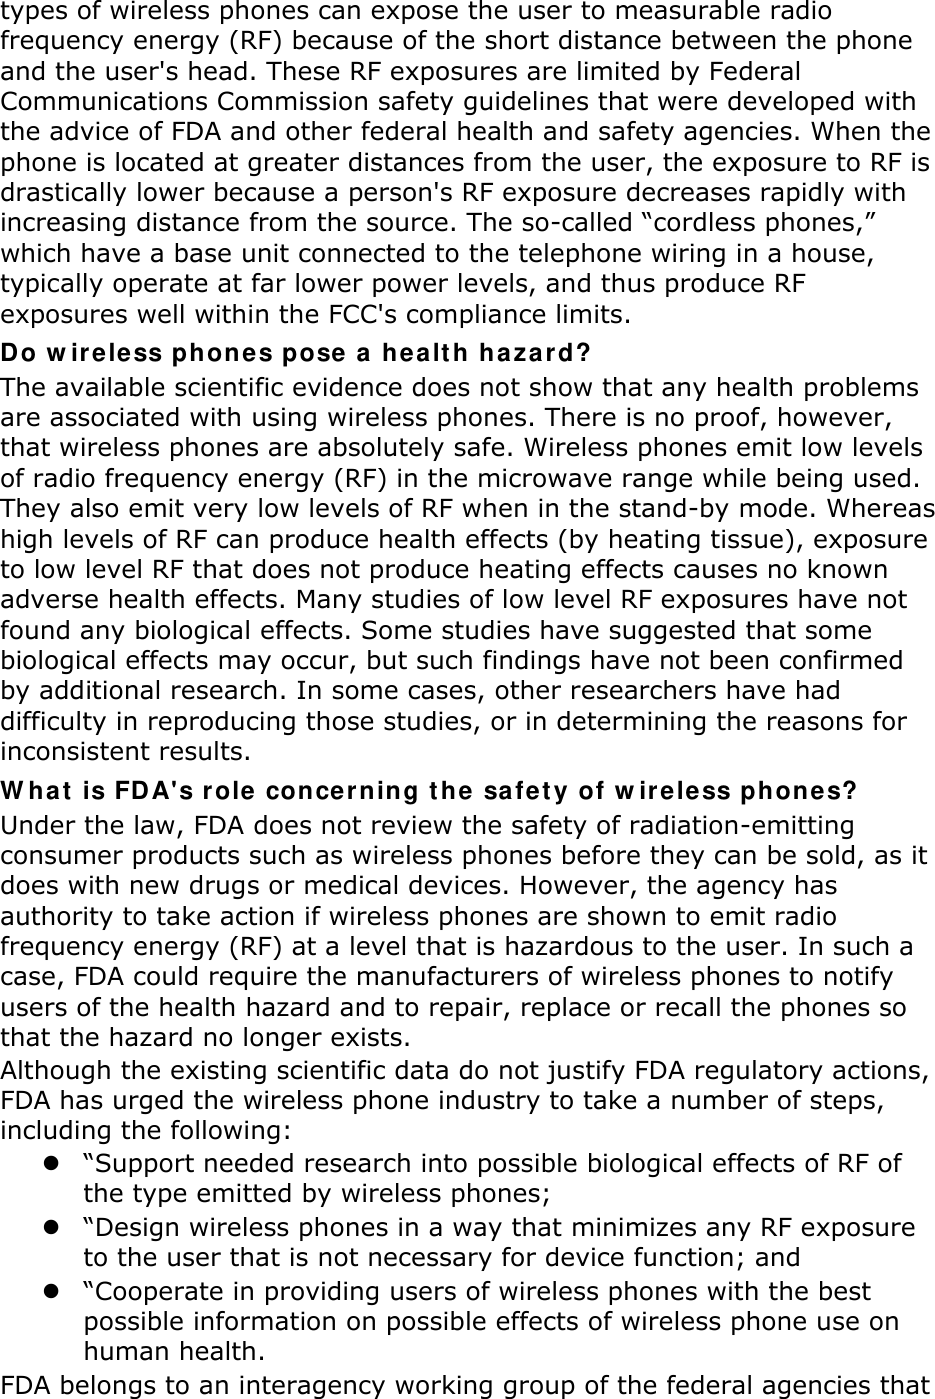 types of wireless phones can expose the user to measurable radio frequency energy (RF) because of the short distance between the phone and the user&apos;s head. These RF exposures are limited by Federal Communications Commission safety guidelines that were developed with the advice of FDA and other federal health and safety agencies. When the phone is located at greater distances from the user, the exposure to RF is drastically lower because a person&apos;s RF exposure decreases rapidly with increasing distance from the source. The so-called “cordless phones,” which have a base unit connected to the telephone wiring in a house, typically operate at far lower power levels, and thus produce RF exposures well within the FCC&apos;s compliance limits. Do wireless phones pose a health hazard? The available scientific evidence does not show that any health problems are associated with using wireless phones. There is no proof, however, that wireless phones are absolutely safe. Wireless phones emit low levels of radio frequency energy (RF) in the microwave range while being used. They also emit very low levels of RF when in the stand-by mode. Whereas high levels of RF can produce health effects (by heating tissue), exposure to low level RF that does not produce heating effects causes no known adverse health effects. Many studies of low level RF exposures have not found any biological effects. Some studies have suggested that some biological effects may occur, but such findings have not been confirmed by additional research. In some cases, other researchers have had difficulty in reproducing those studies, or in determining the reasons for inconsistent results. What is FDA&apos;s role concerning the safety of wireless phones? Under the law, FDA does not review the safety of radiation-emitting consumer products such as wireless phones before they can be sold, as it does with new drugs or medical devices. However, the agency has authority to take action if wireless phones are shown to emit radio frequency energy (RF) at a level that is hazardous to the user. In such a case, FDA could require the manufacturers of wireless phones to notify users of the health hazard and to repair, replace or recall the phones so that the hazard no longer exists. Although the existing scientific data do not justify FDA regulatory actions, FDA has urged the wireless phone industry to take a number of steps, including the following:  “Support needed research into possible biological effects of RF of the type emitted by wireless phones;  “Design wireless phones in a way that minimizes any RF exposure to the user that is not necessary for device function; and  “Cooperate in providing users of wireless phones with the best possible information on possible effects of wireless phone use on human health. FDA belongs to an interagency working group of the federal agencies that 